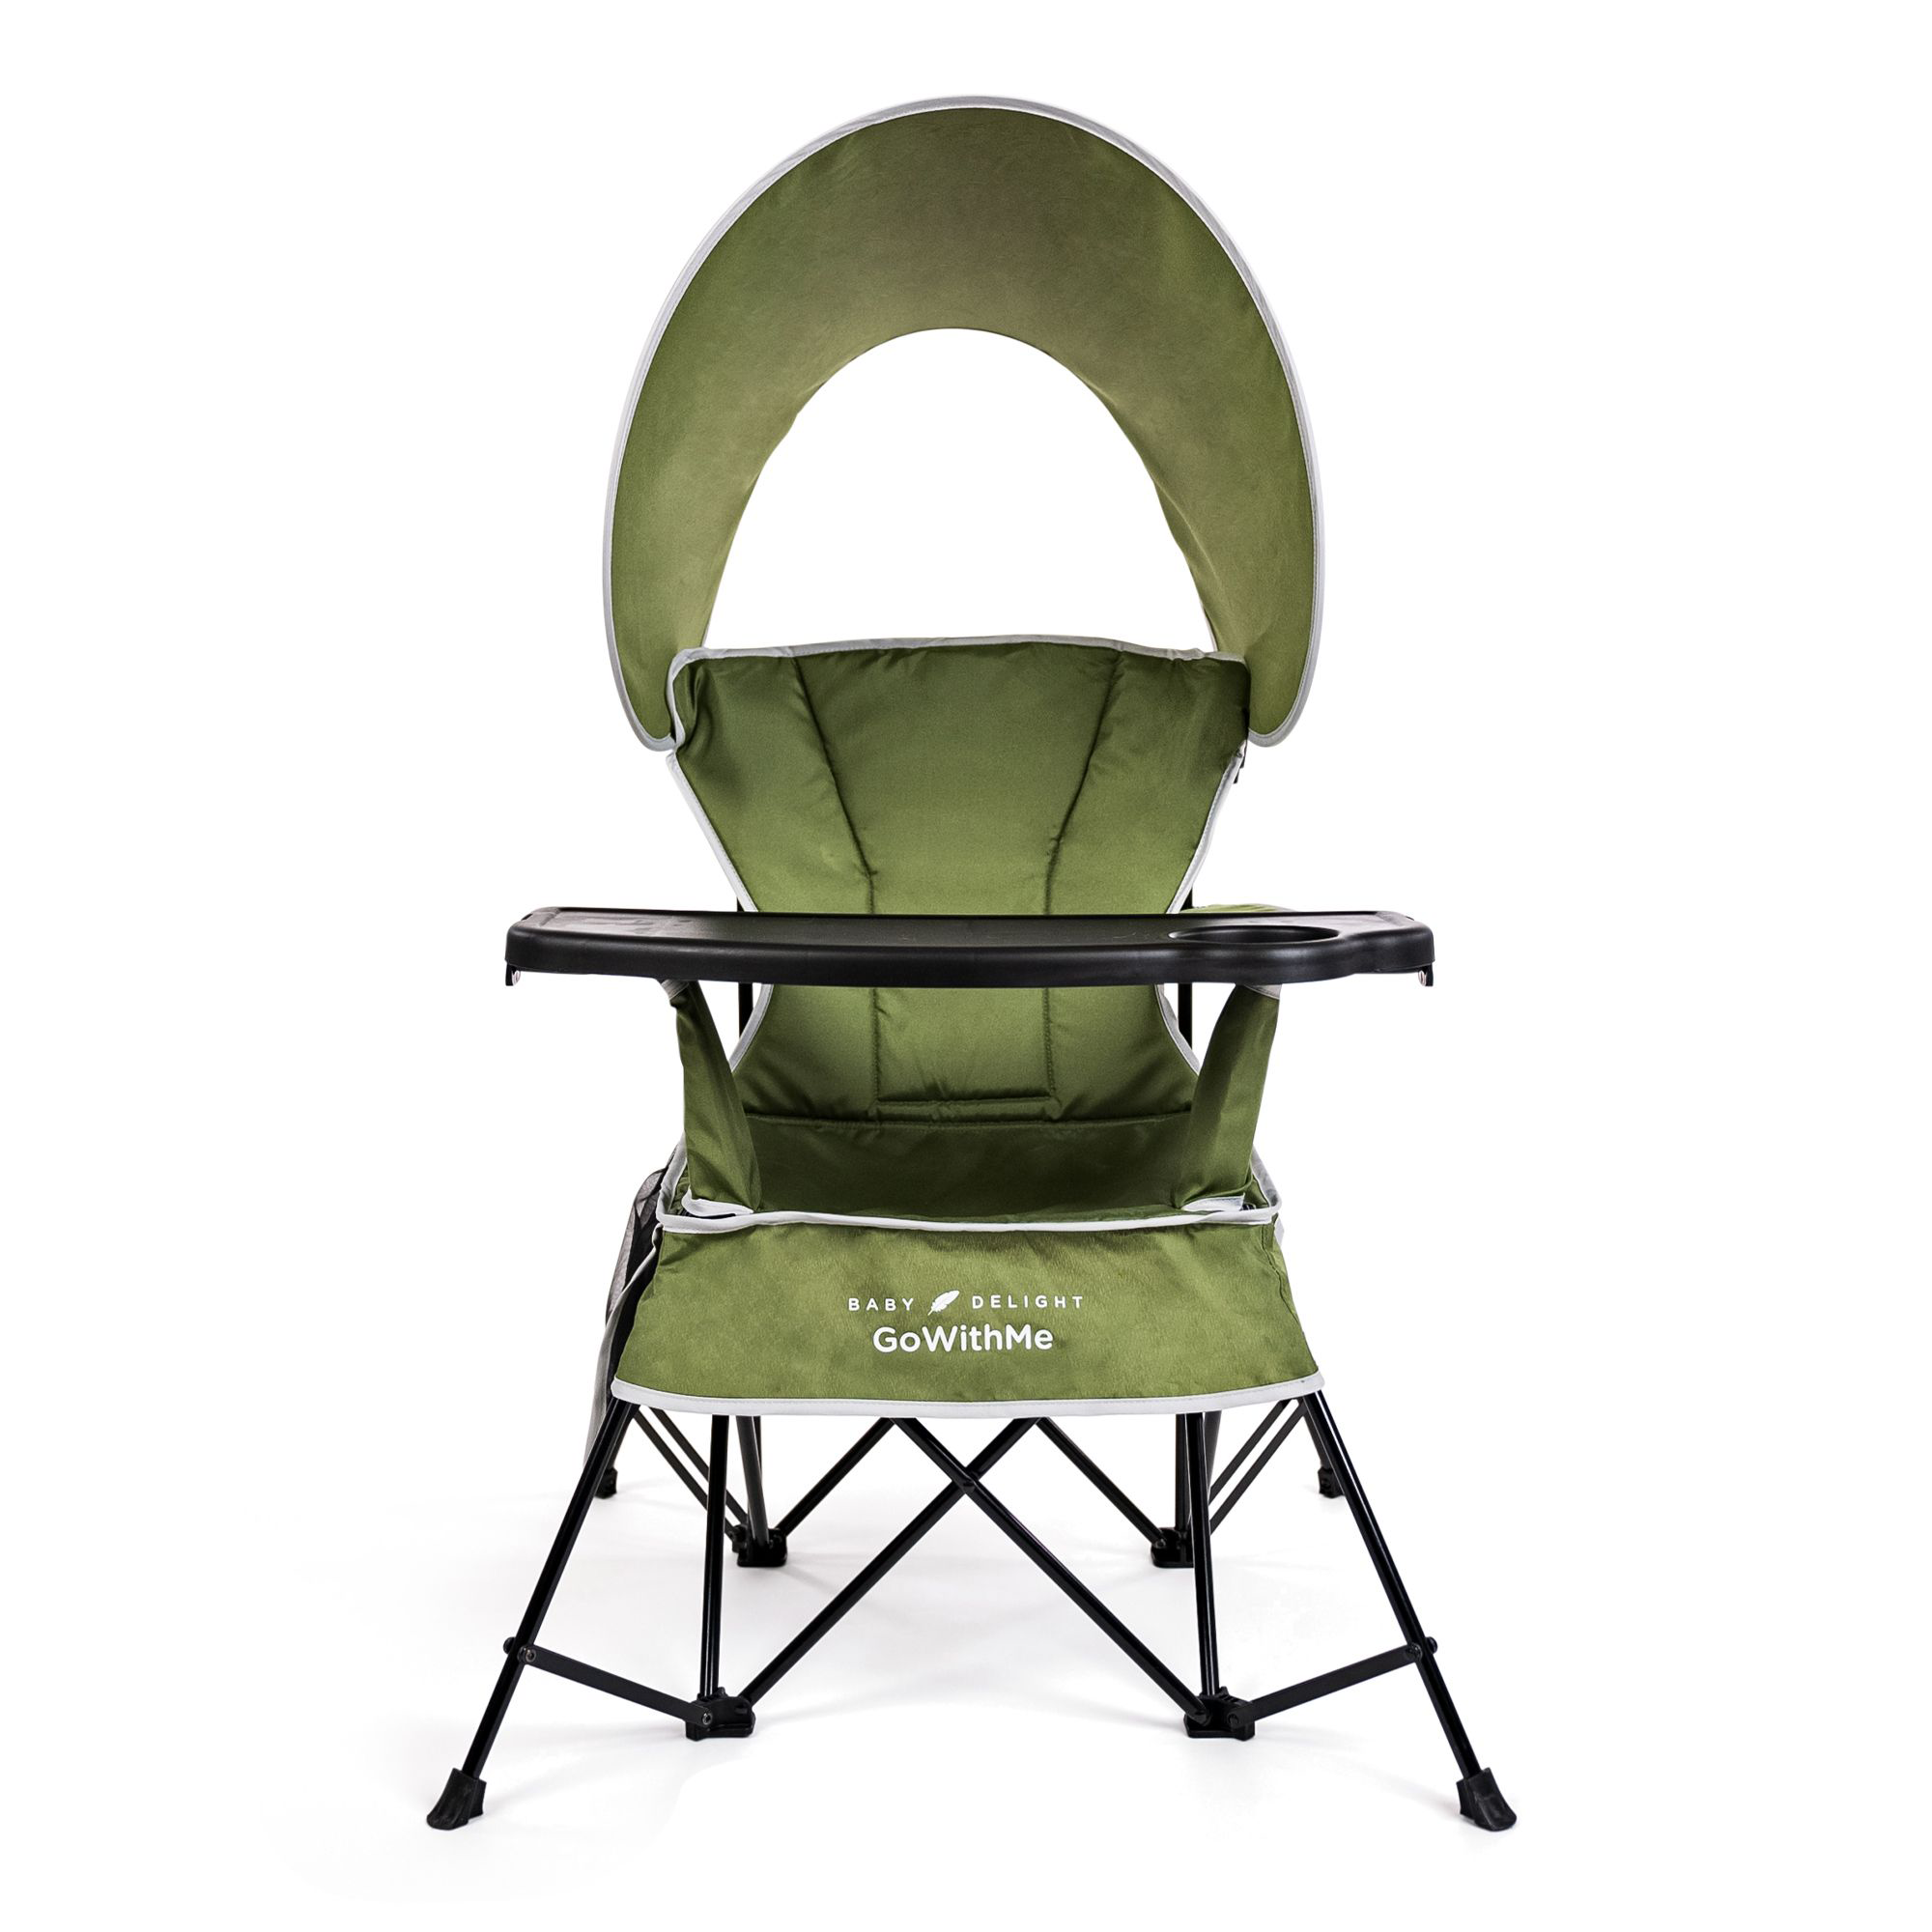 Baby Delight Go With Me Grand Deluxe Portable Chair for Kids - Moss Bud